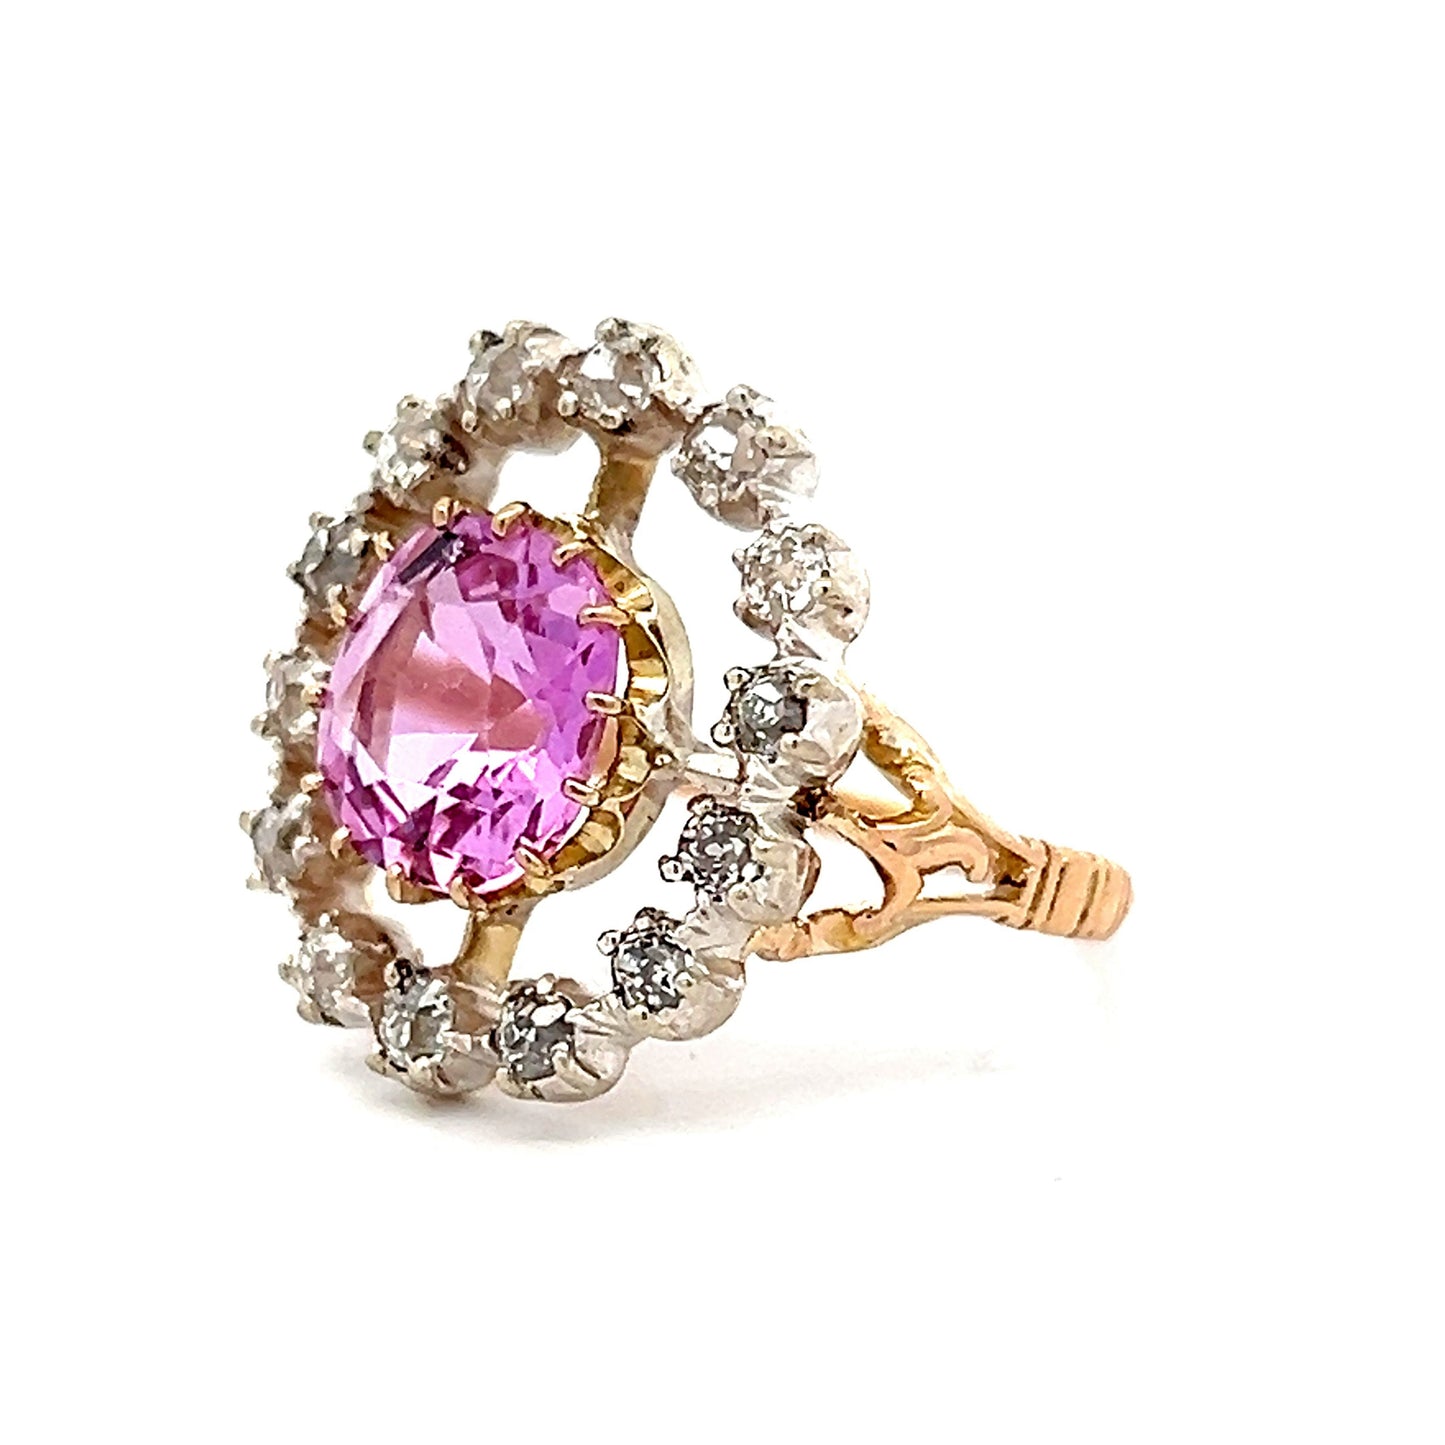 Antique Imperial Pink Topaz & Diamond Ring in 14k Gold